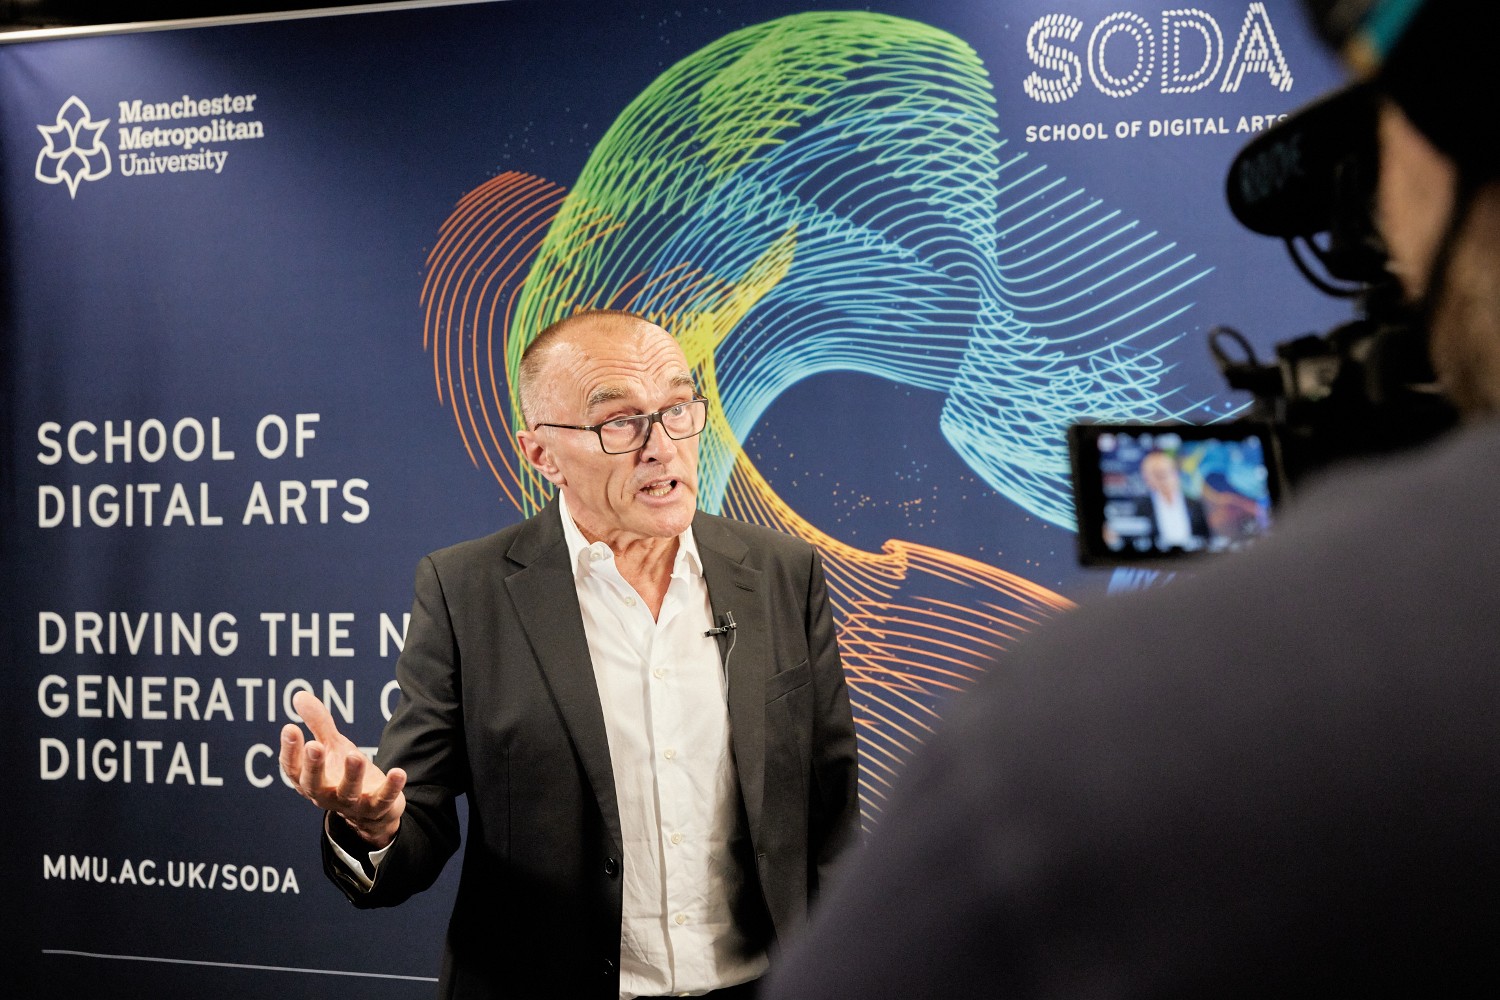 Danny Boyle, co-chair of the SODA advisory board, officially launched the new School